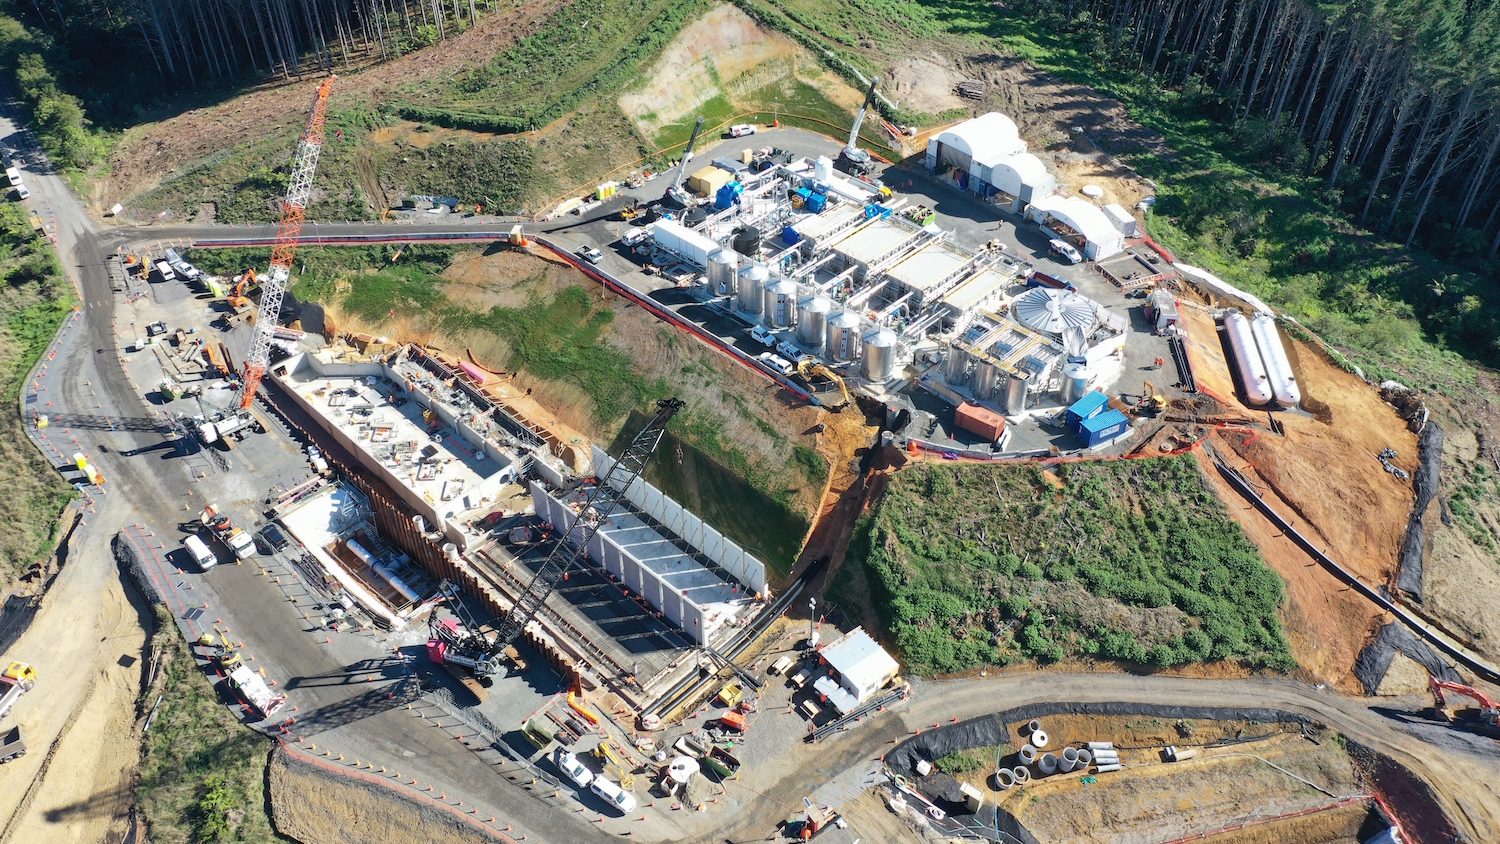 Watercare water works - A drone survey image of Waikato treatment plant in New Zealand image for Watercare Services digital transformation story